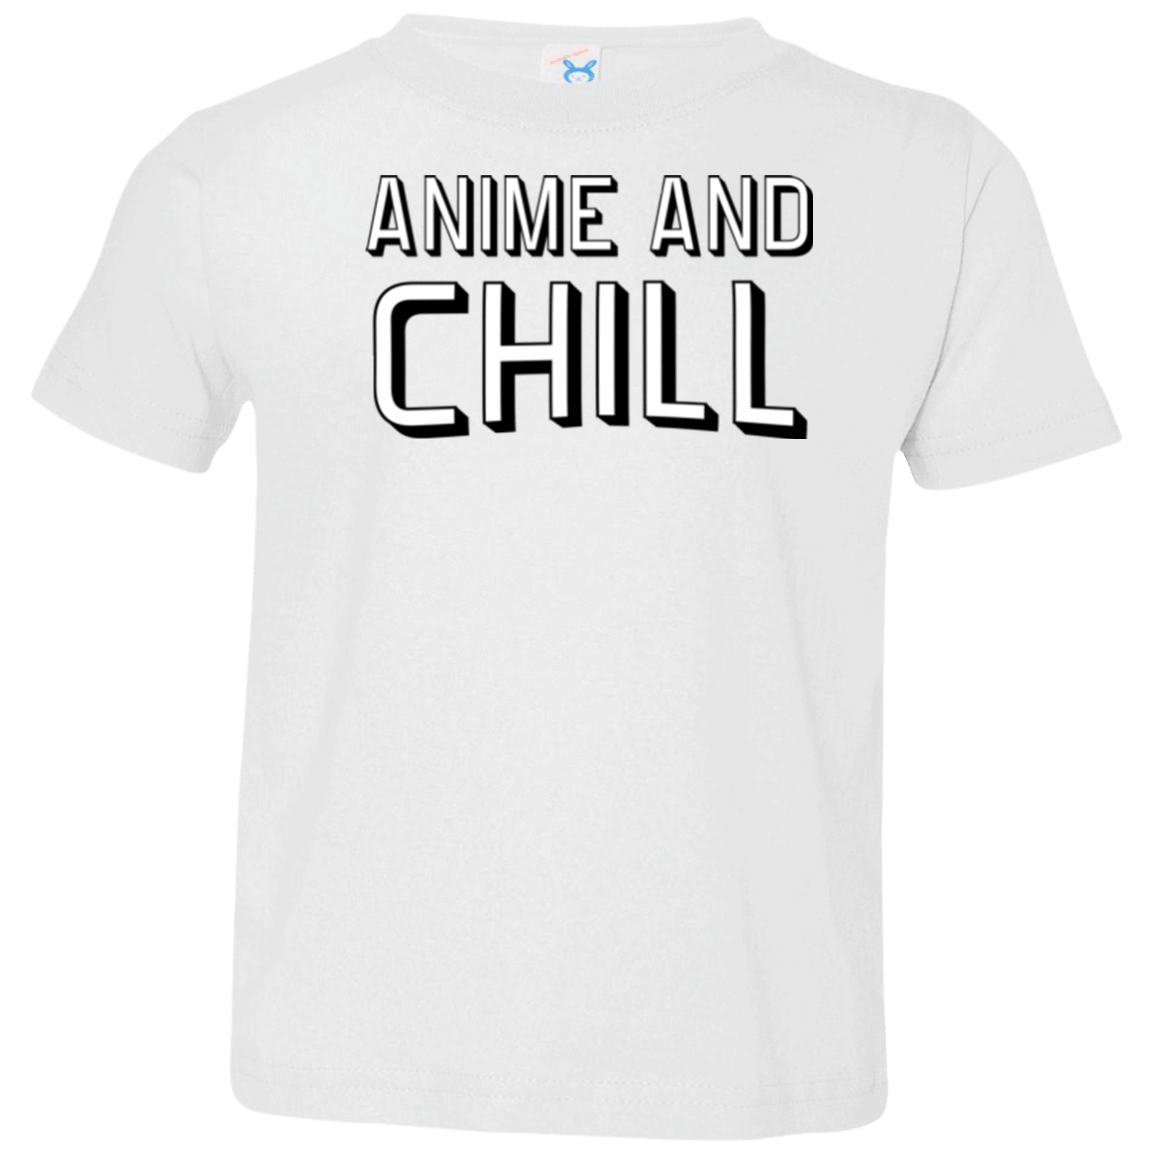 T-Shirts White / 2T Anime and chill Toddler Premium T-Shirt